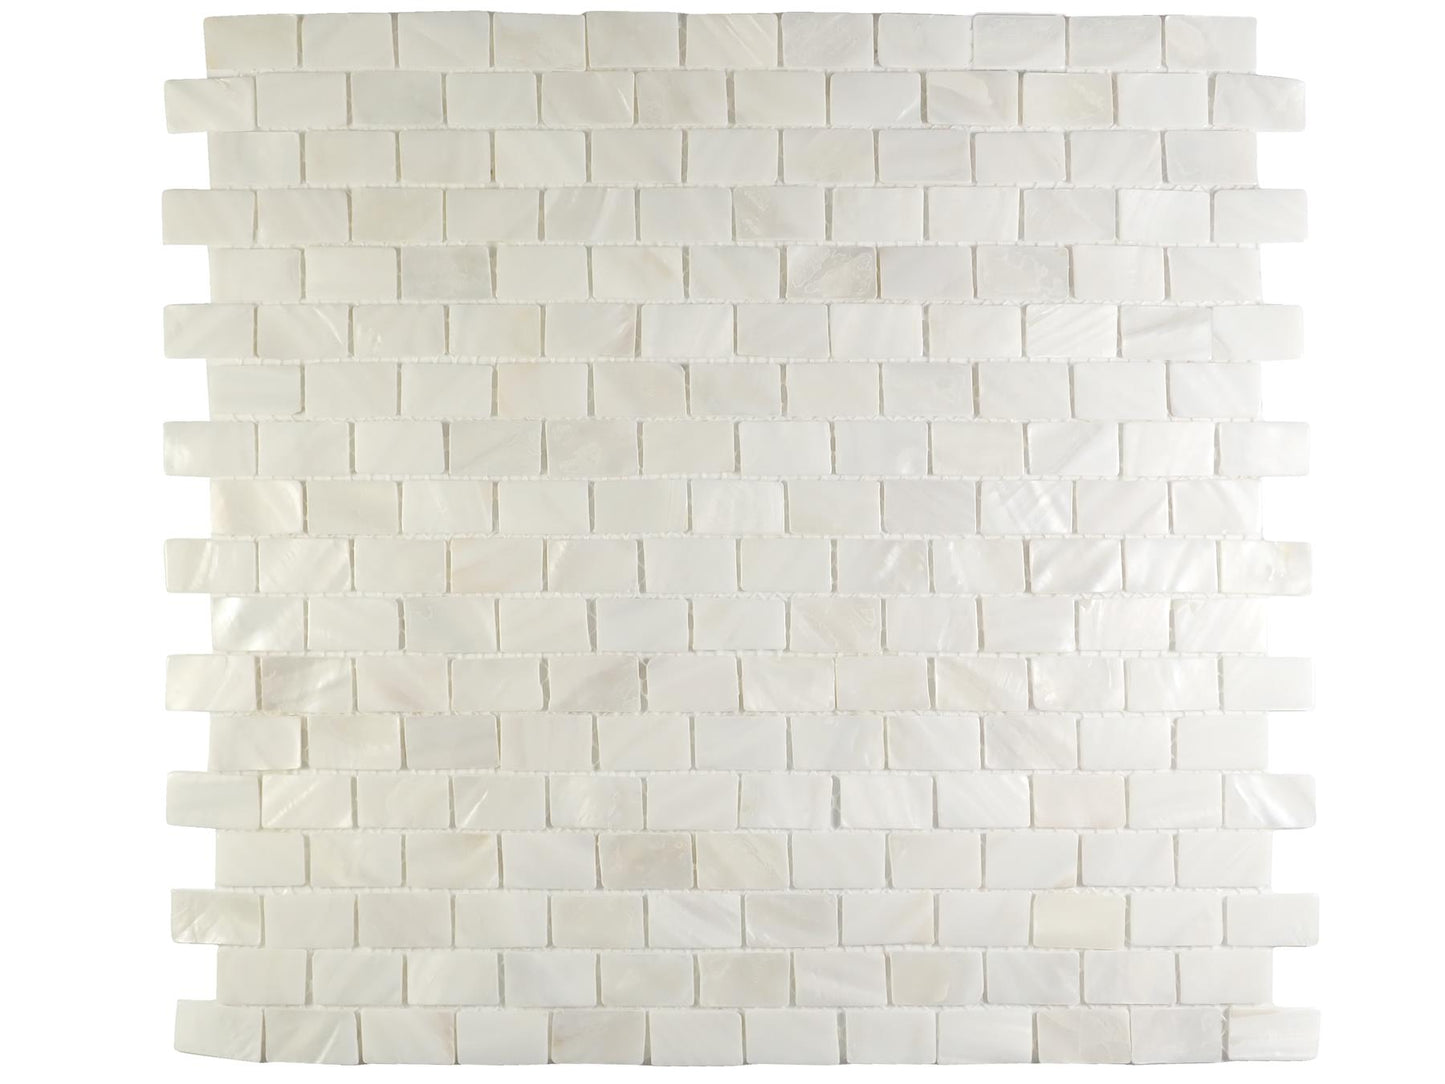 Incudo White Metro Mosaic Mother of Pearl Tiles - 285x300x2mm (11.2x11.81x0.08"), Pack of 12, 1.03 Sq. M